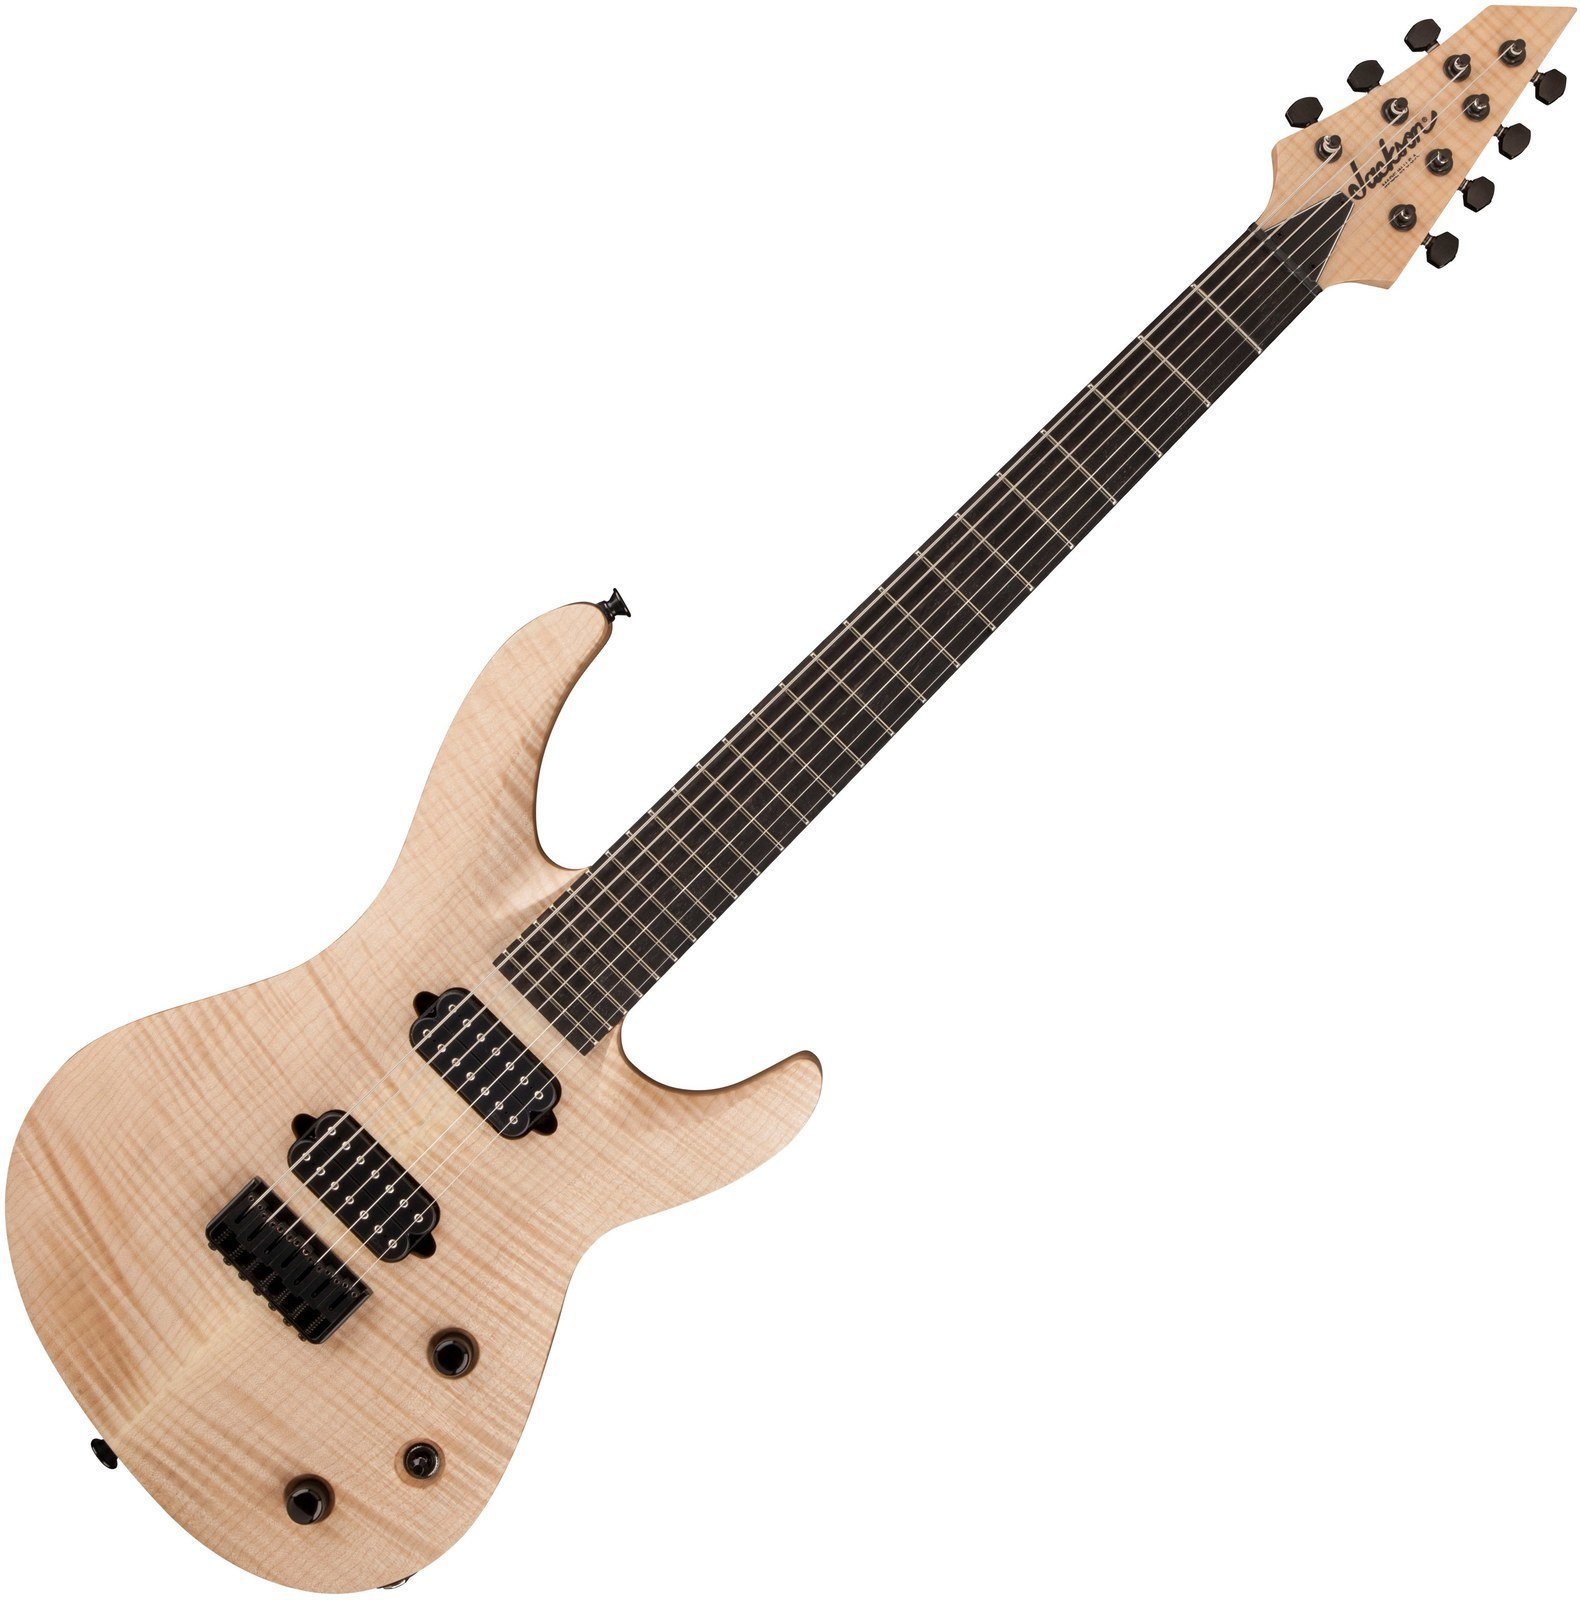 7-string Electric Guitar Jackson USA Select B7 Deluxe Natural